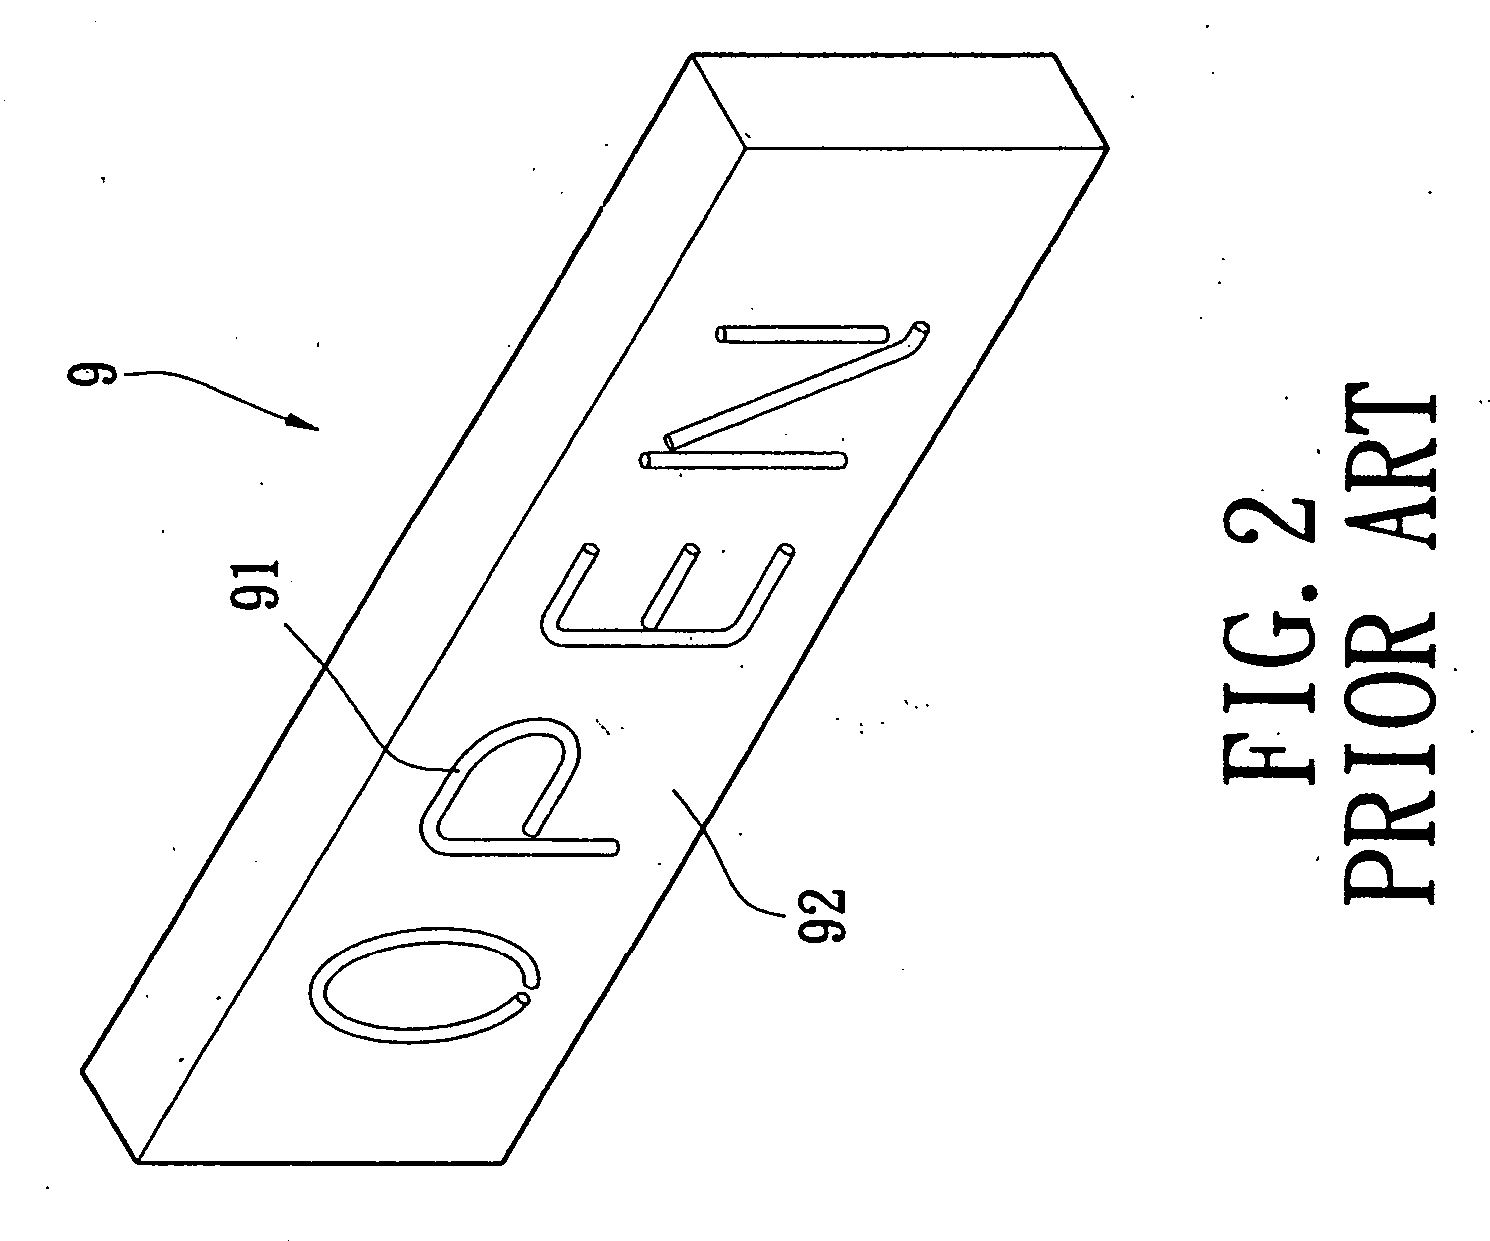 Laminated light-emitting diode display device and manufacturing method thereof